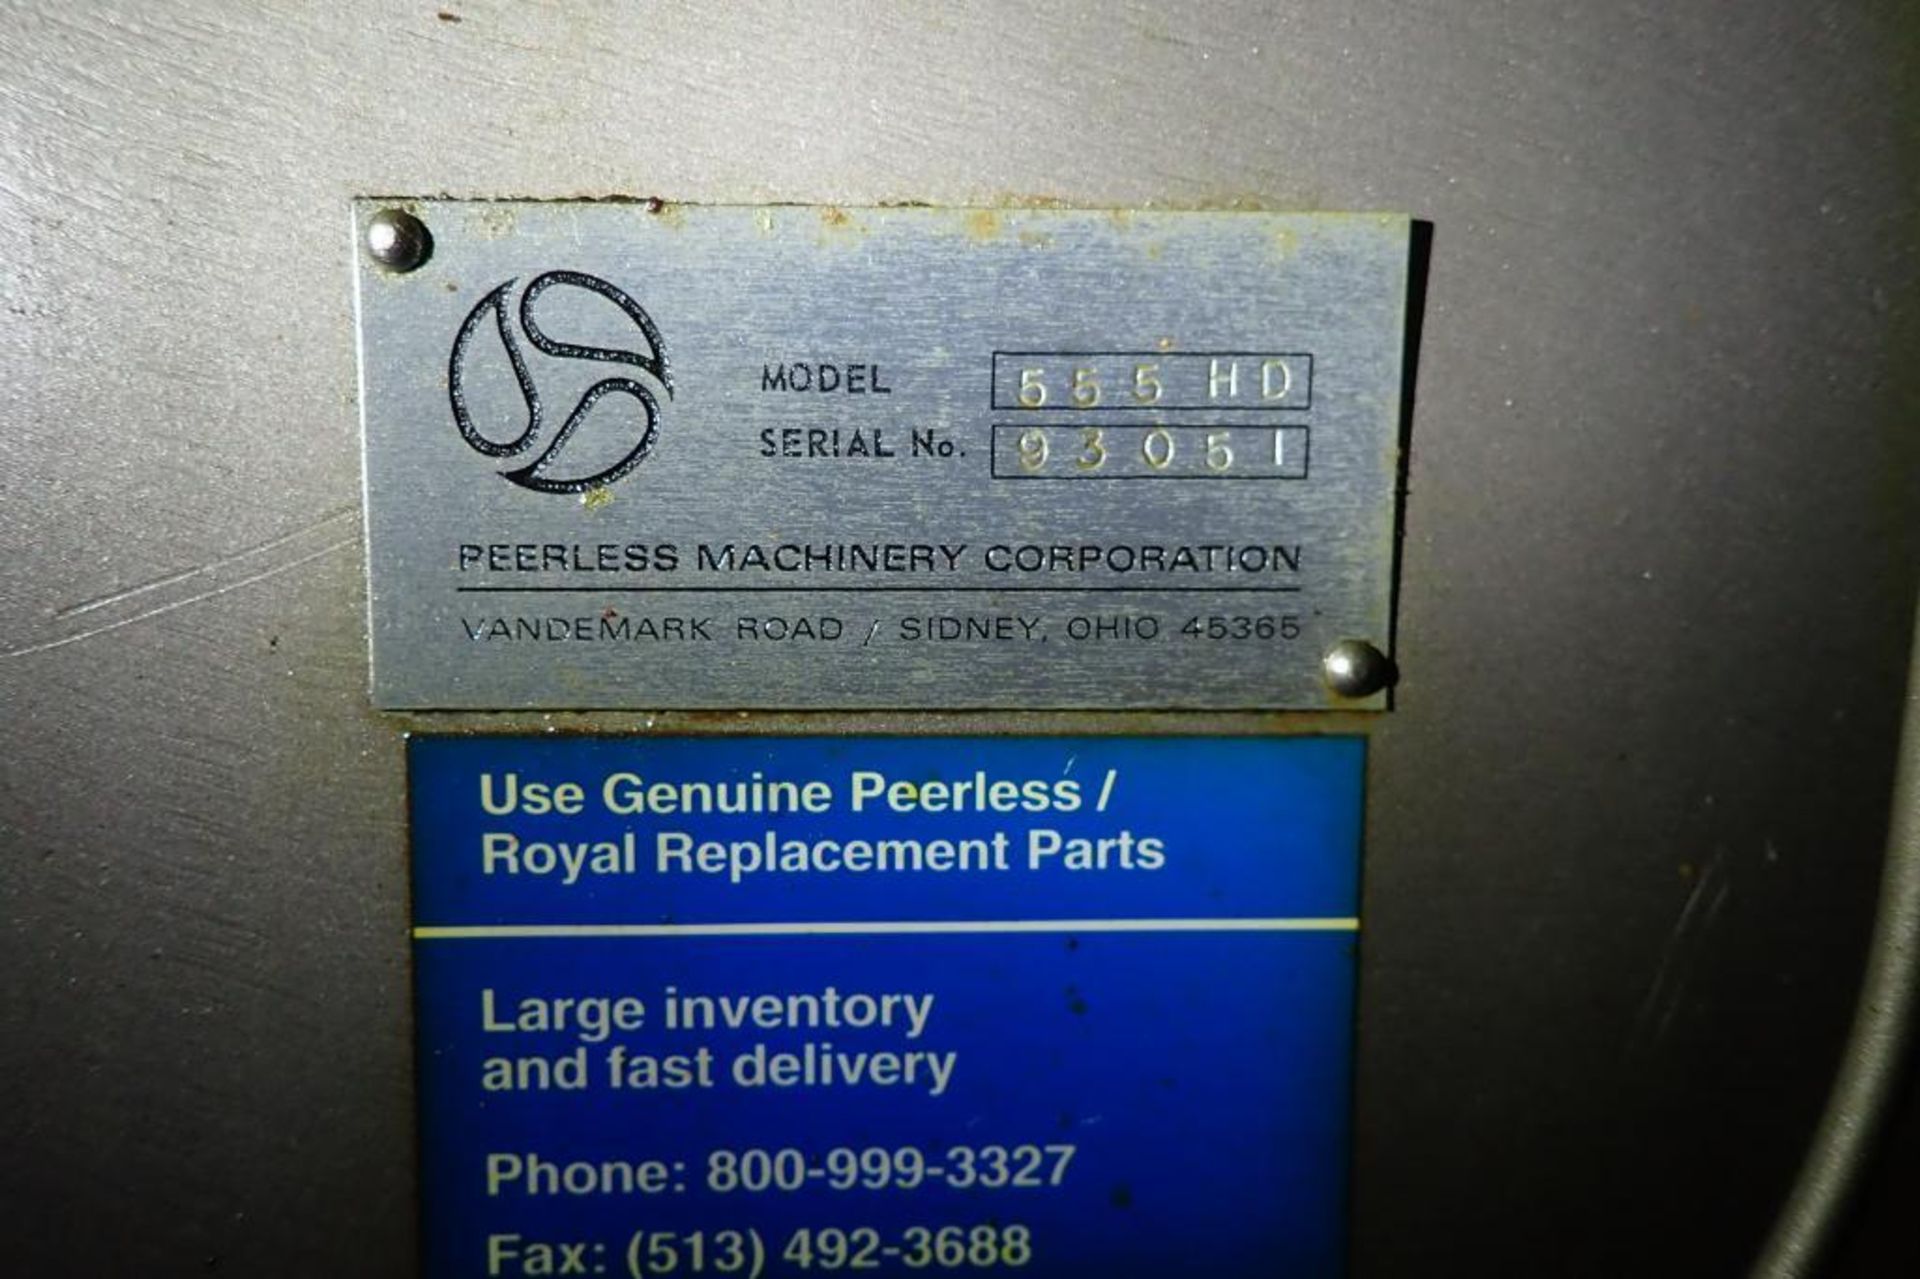 Peerless SS roller bar mixer, Model 555HD, SN 93051, 42 in. bowl, jacketed. **Rigging Fee: $1500** - Image 15 of 18